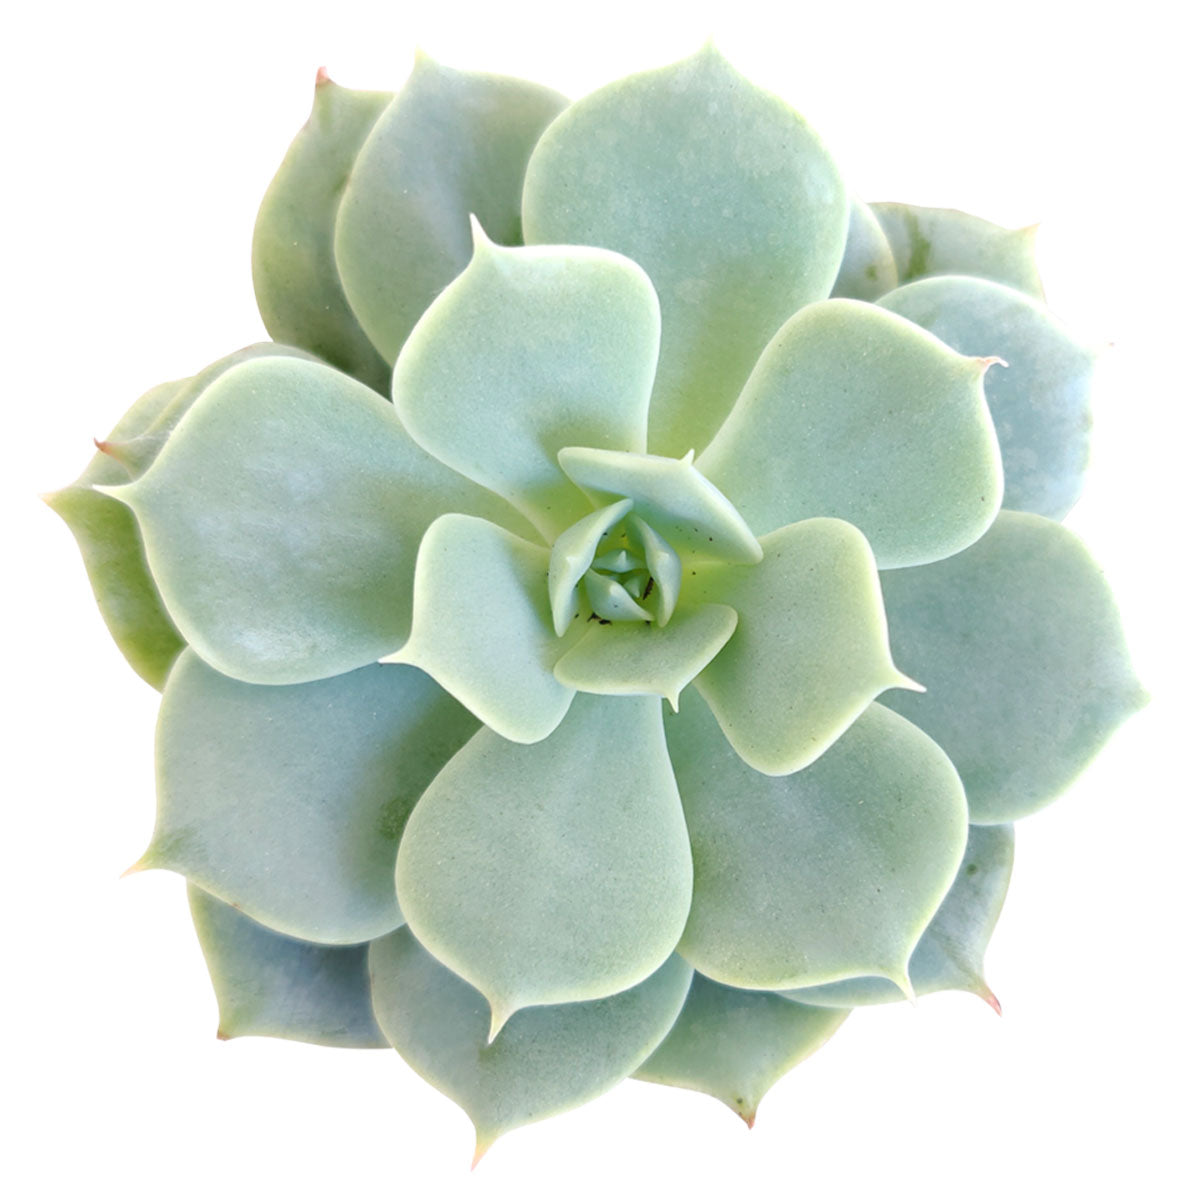 How to care for Echeveria Fleur Blanc Succulent, How to make your succulent pink, How to change succulent color, How to make Echeveria Fleur Blanc turn pink, Succulent turning pink, How to make succulents change color, How to grow colorful succulents, echeveria, echeveria succulent, echeveria types, succulent echeveria, buy succulents online, succulent shop, succulent store, echeveria plant, indoor succulents